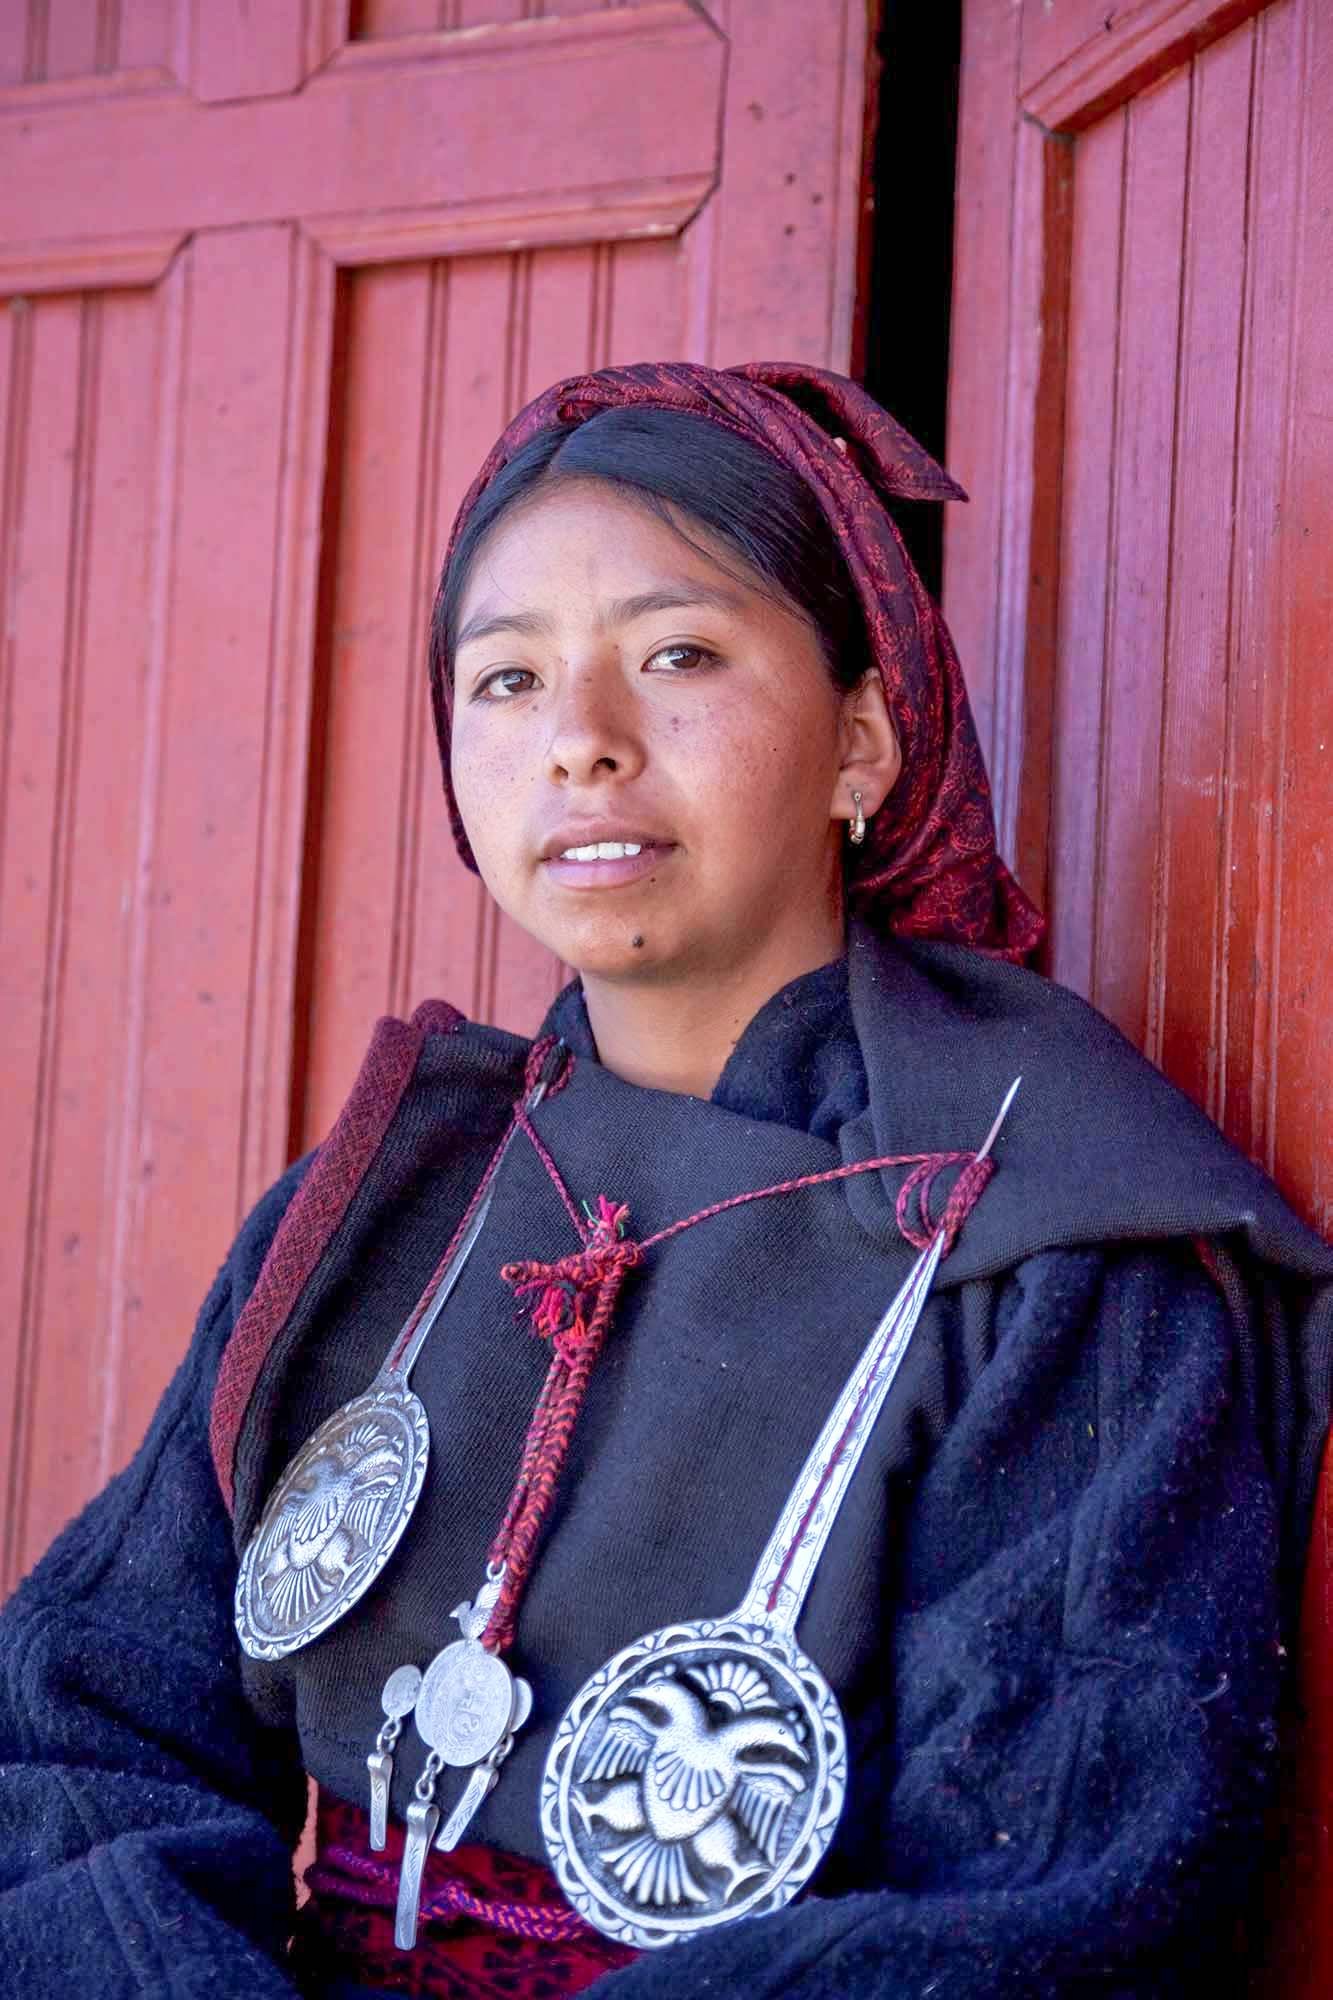  Katty wearing the old traditional outfit during an official function in Tupe.  The original outfit is made of alpaca wool.  The  urku  consist of three rectangular pieces that are pinned to outside of the  kutuna .  The  kutuna  is made of a lighter